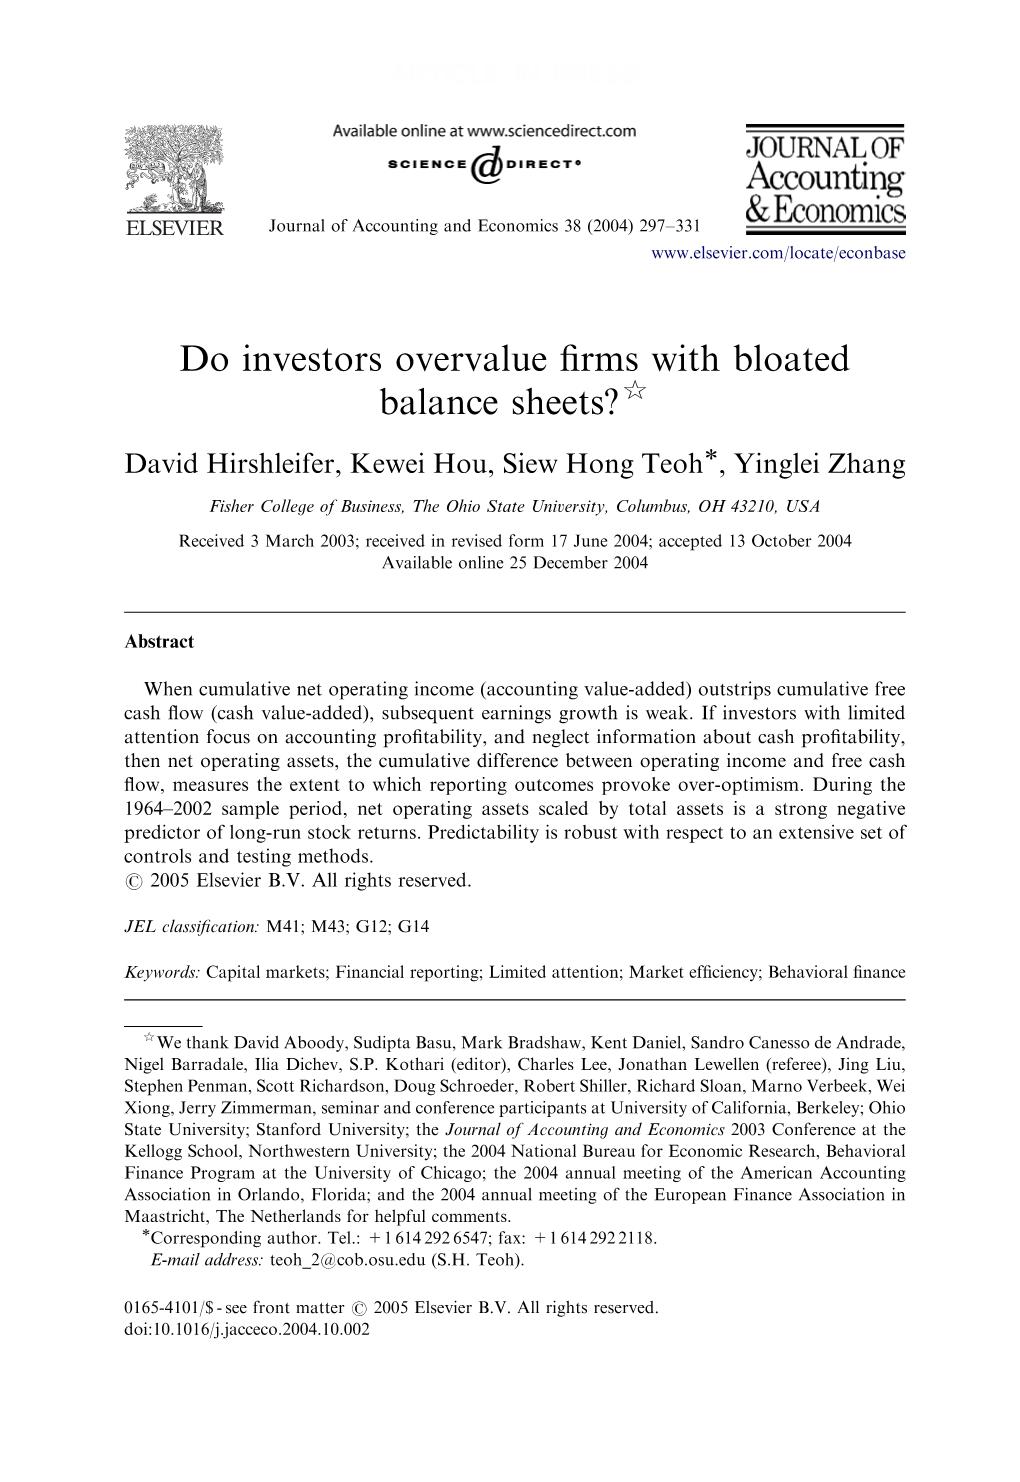 Do Investors Overvalue Firms with Bloated Balance Sheets?